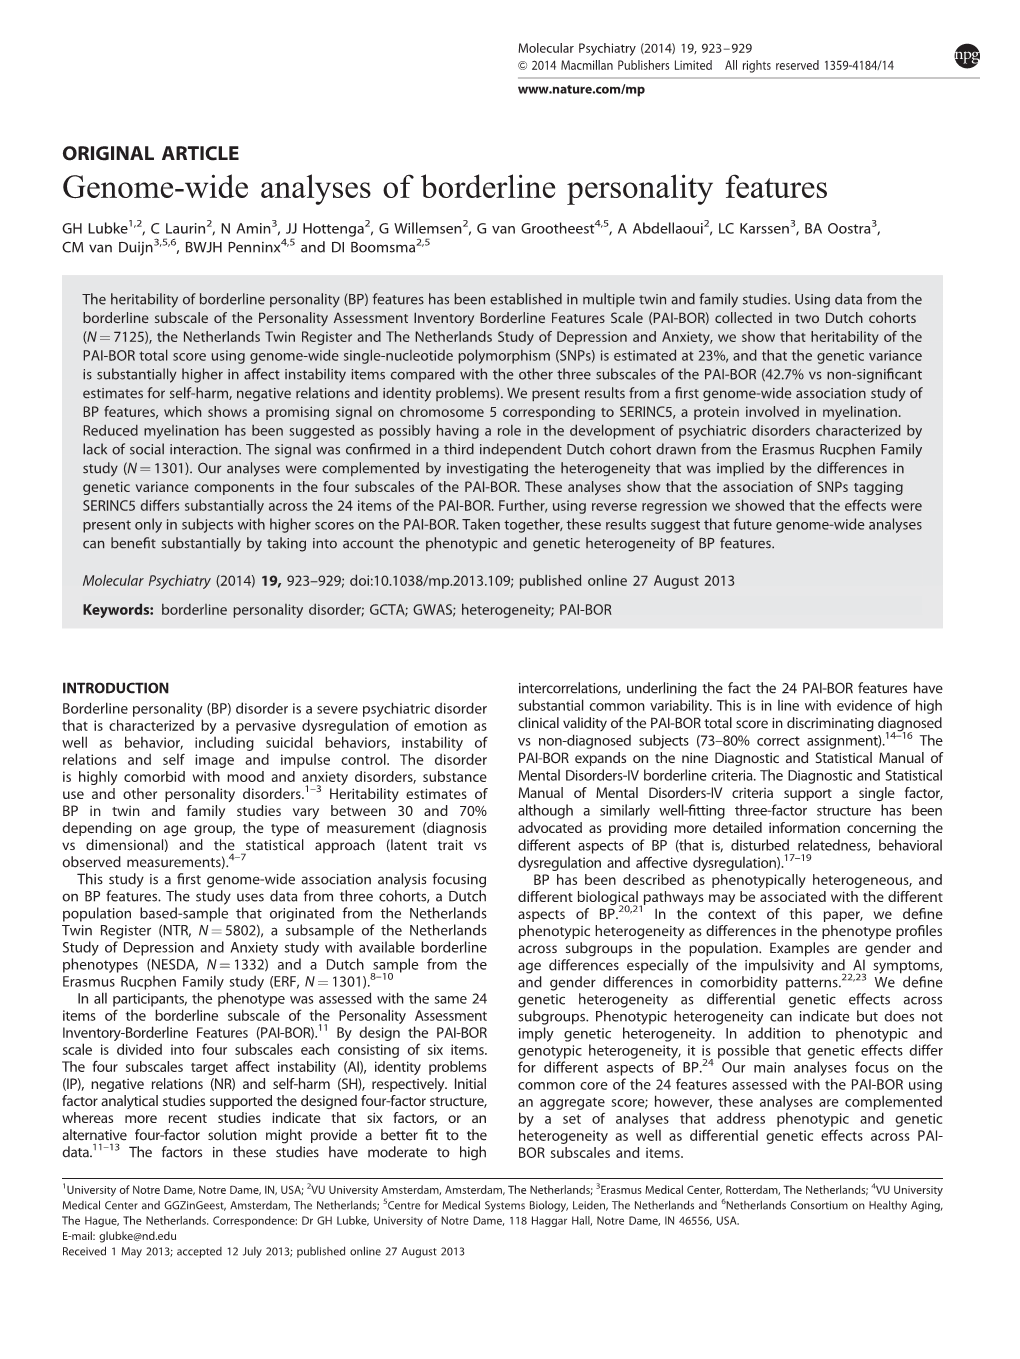 Genome-Wide Analyses of Borderline Personality Features